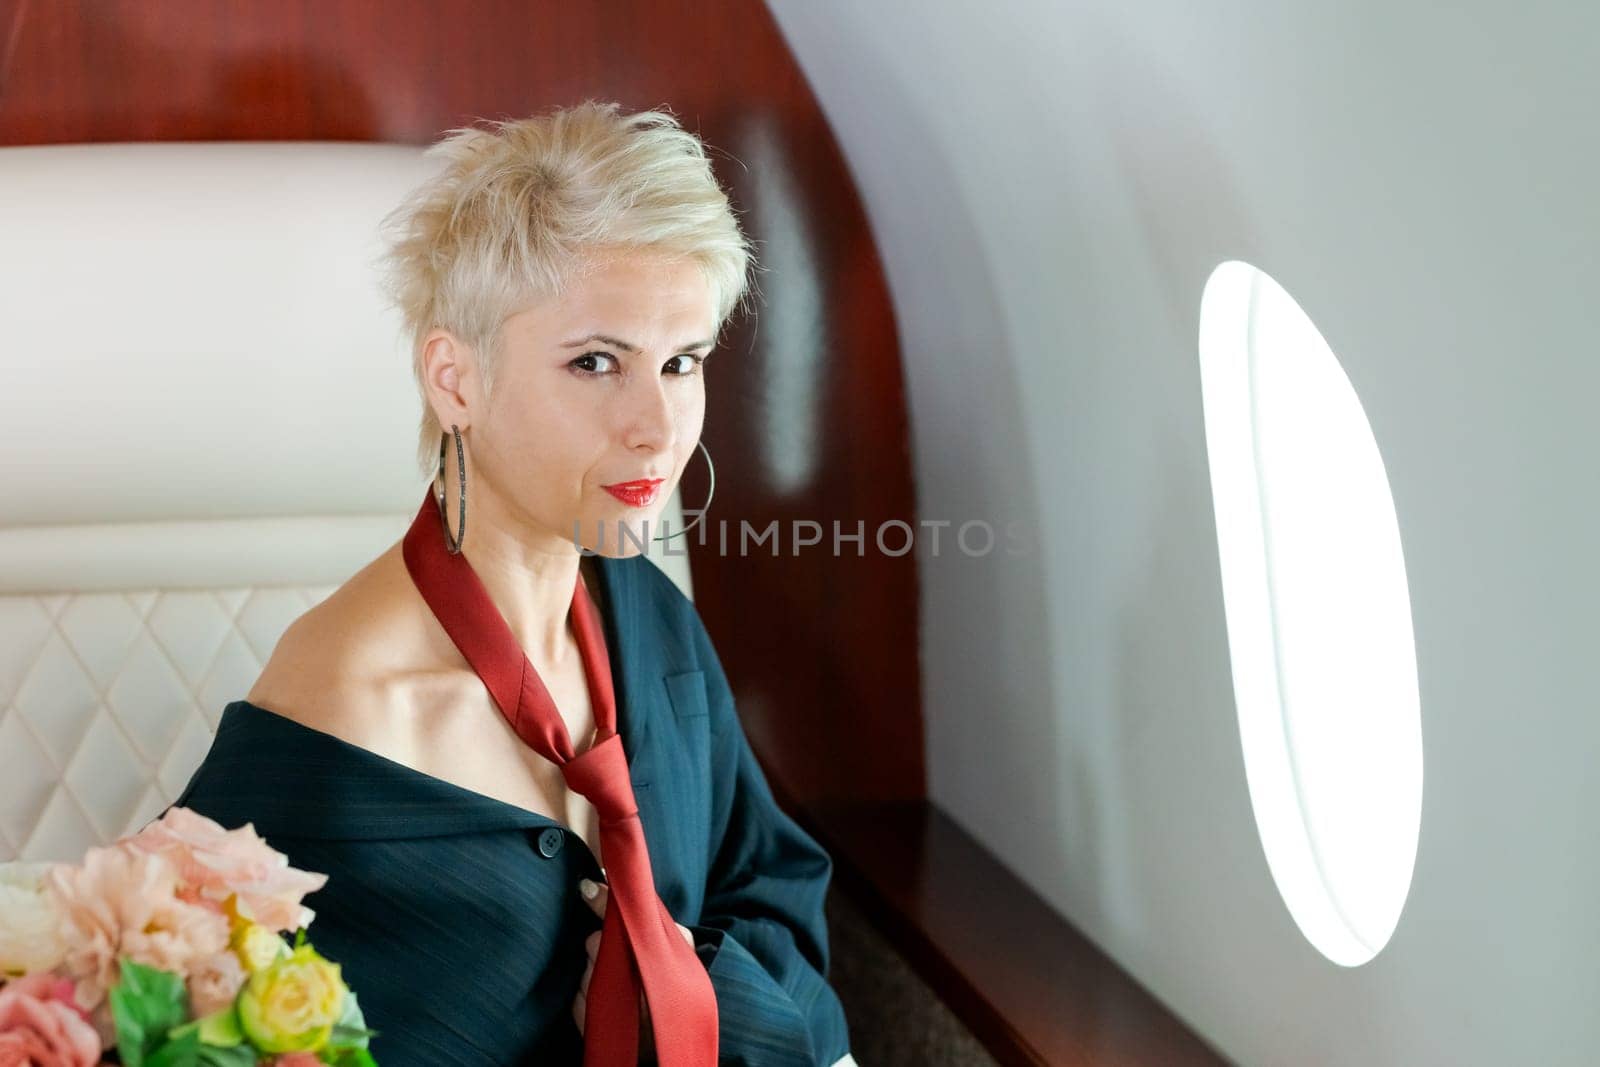 Woman private plane in a jacket with a red tie, New Year's Eve flight, holiday and travel concept